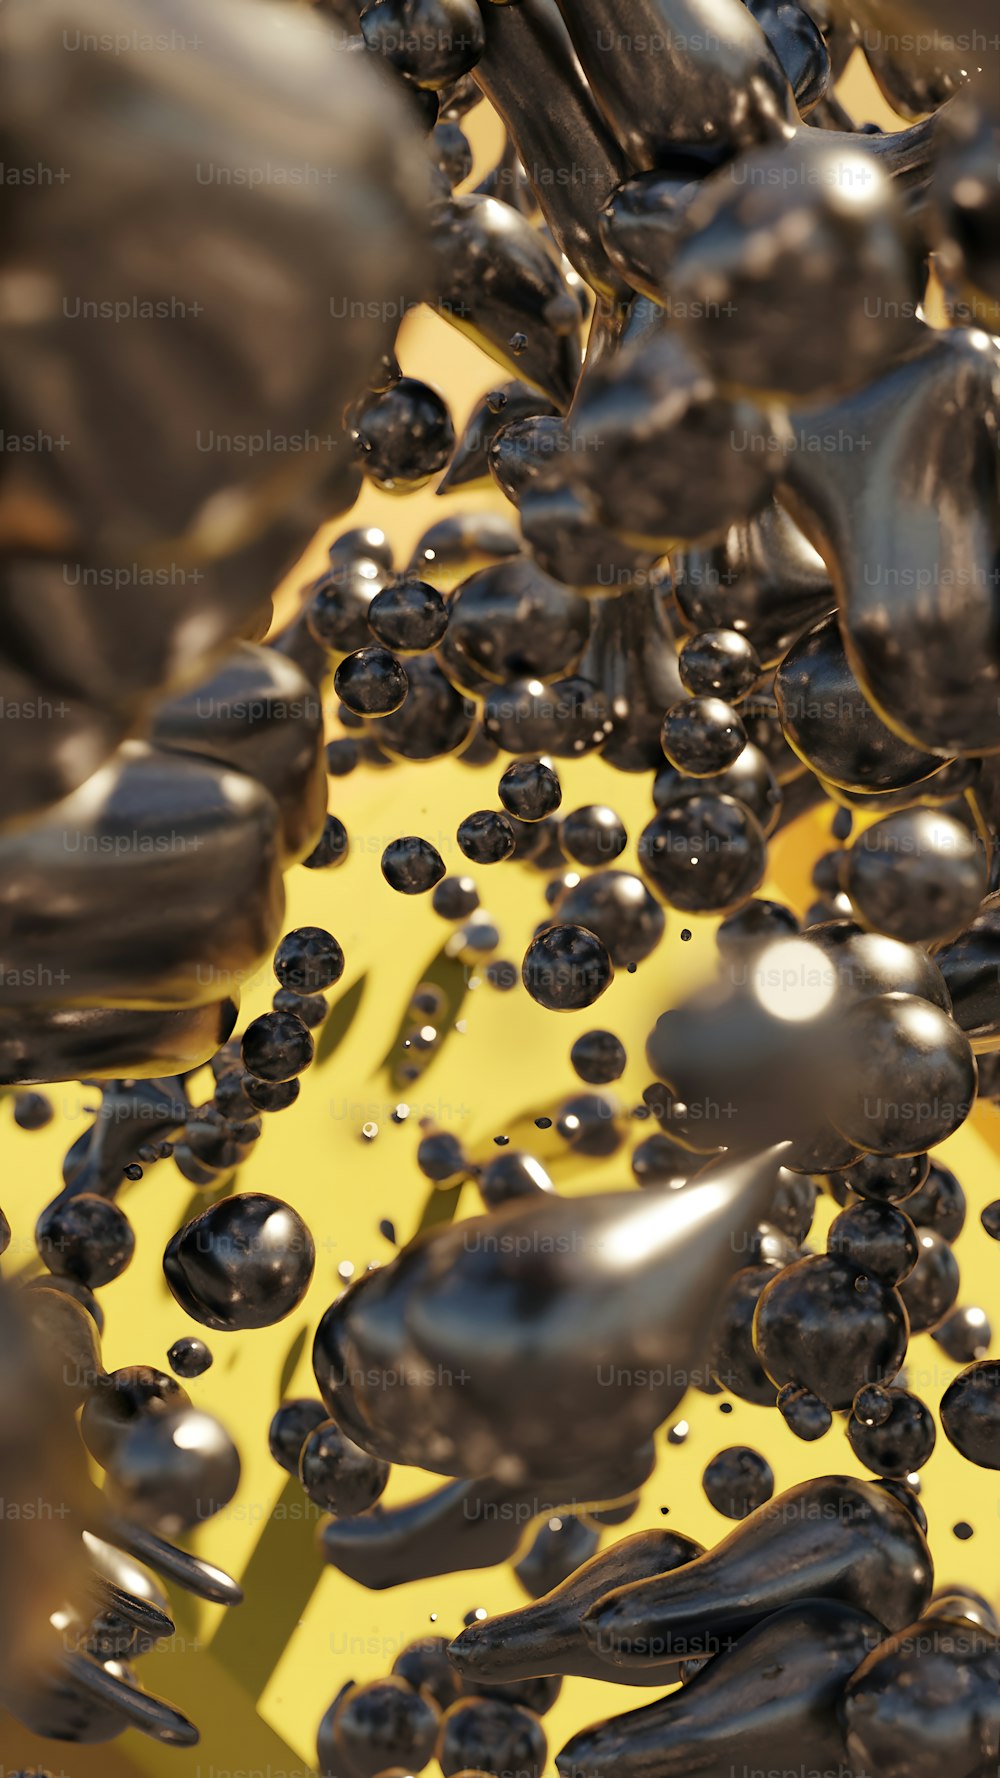 a close up of a bunch of black objects